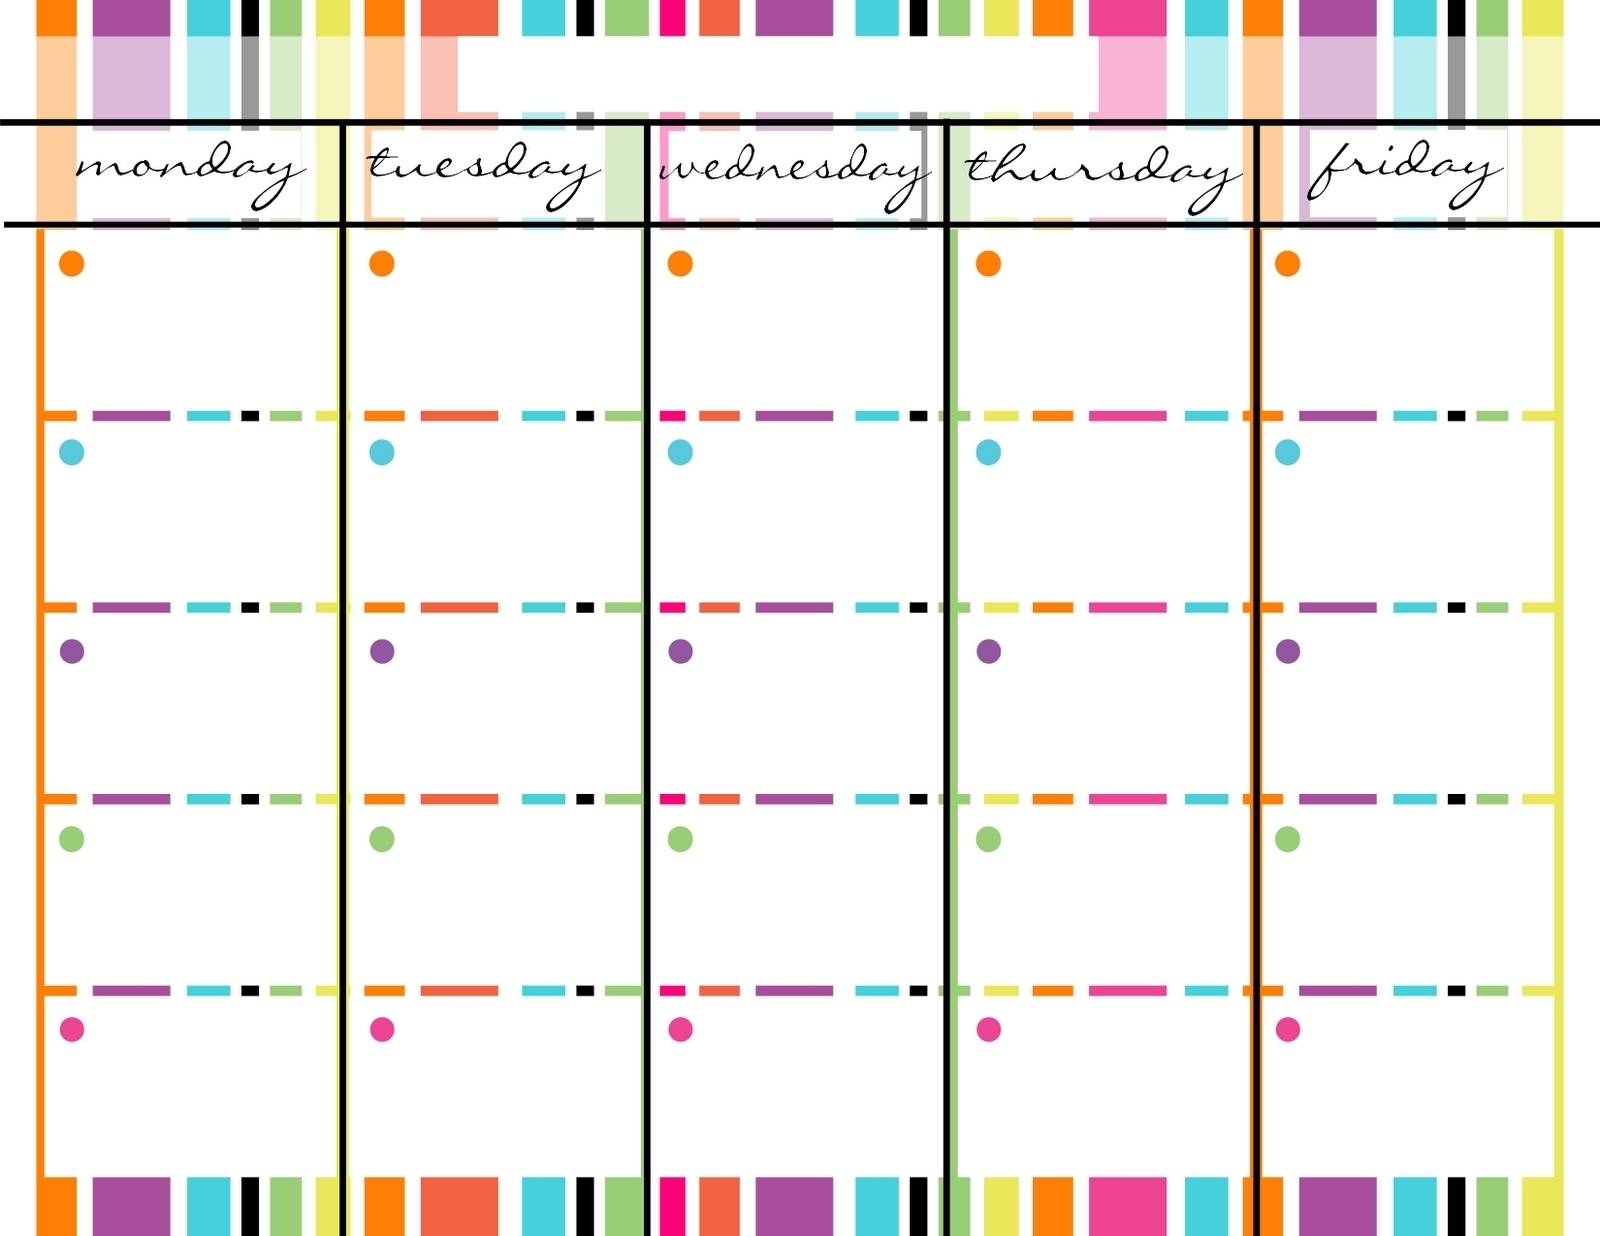 Schedule Template Weekly Blank Calendar Monday Through Iday Holidays with regard to Printable Weekly Schedule Monday Through Friday